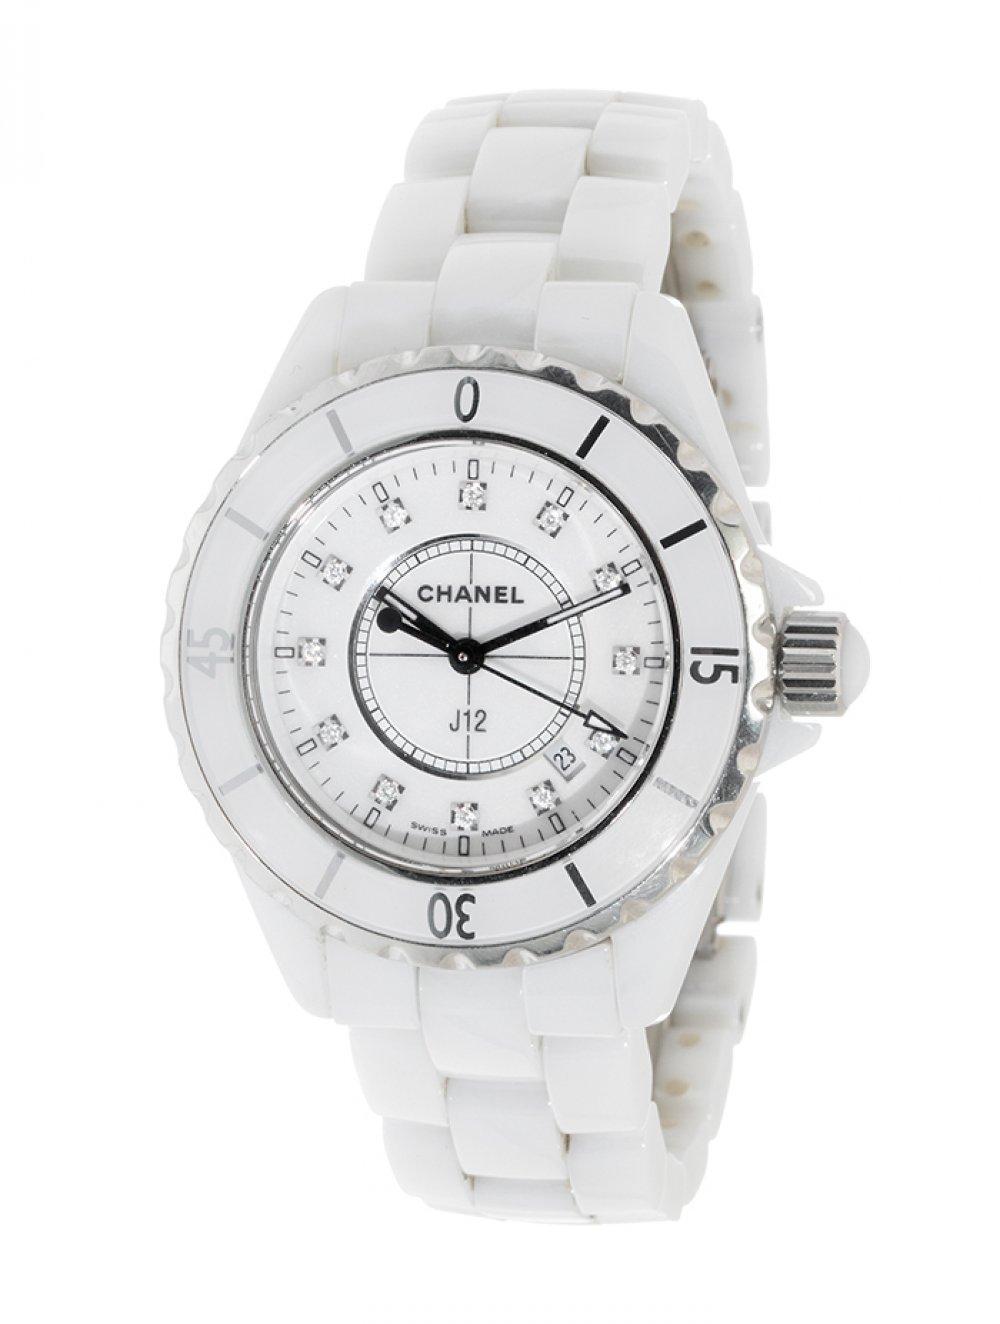 Ritual hver gang lindre Chanel J12 Diamond White Automatic Watch Unisex Steel and Ceramic – Luxury  GoRound